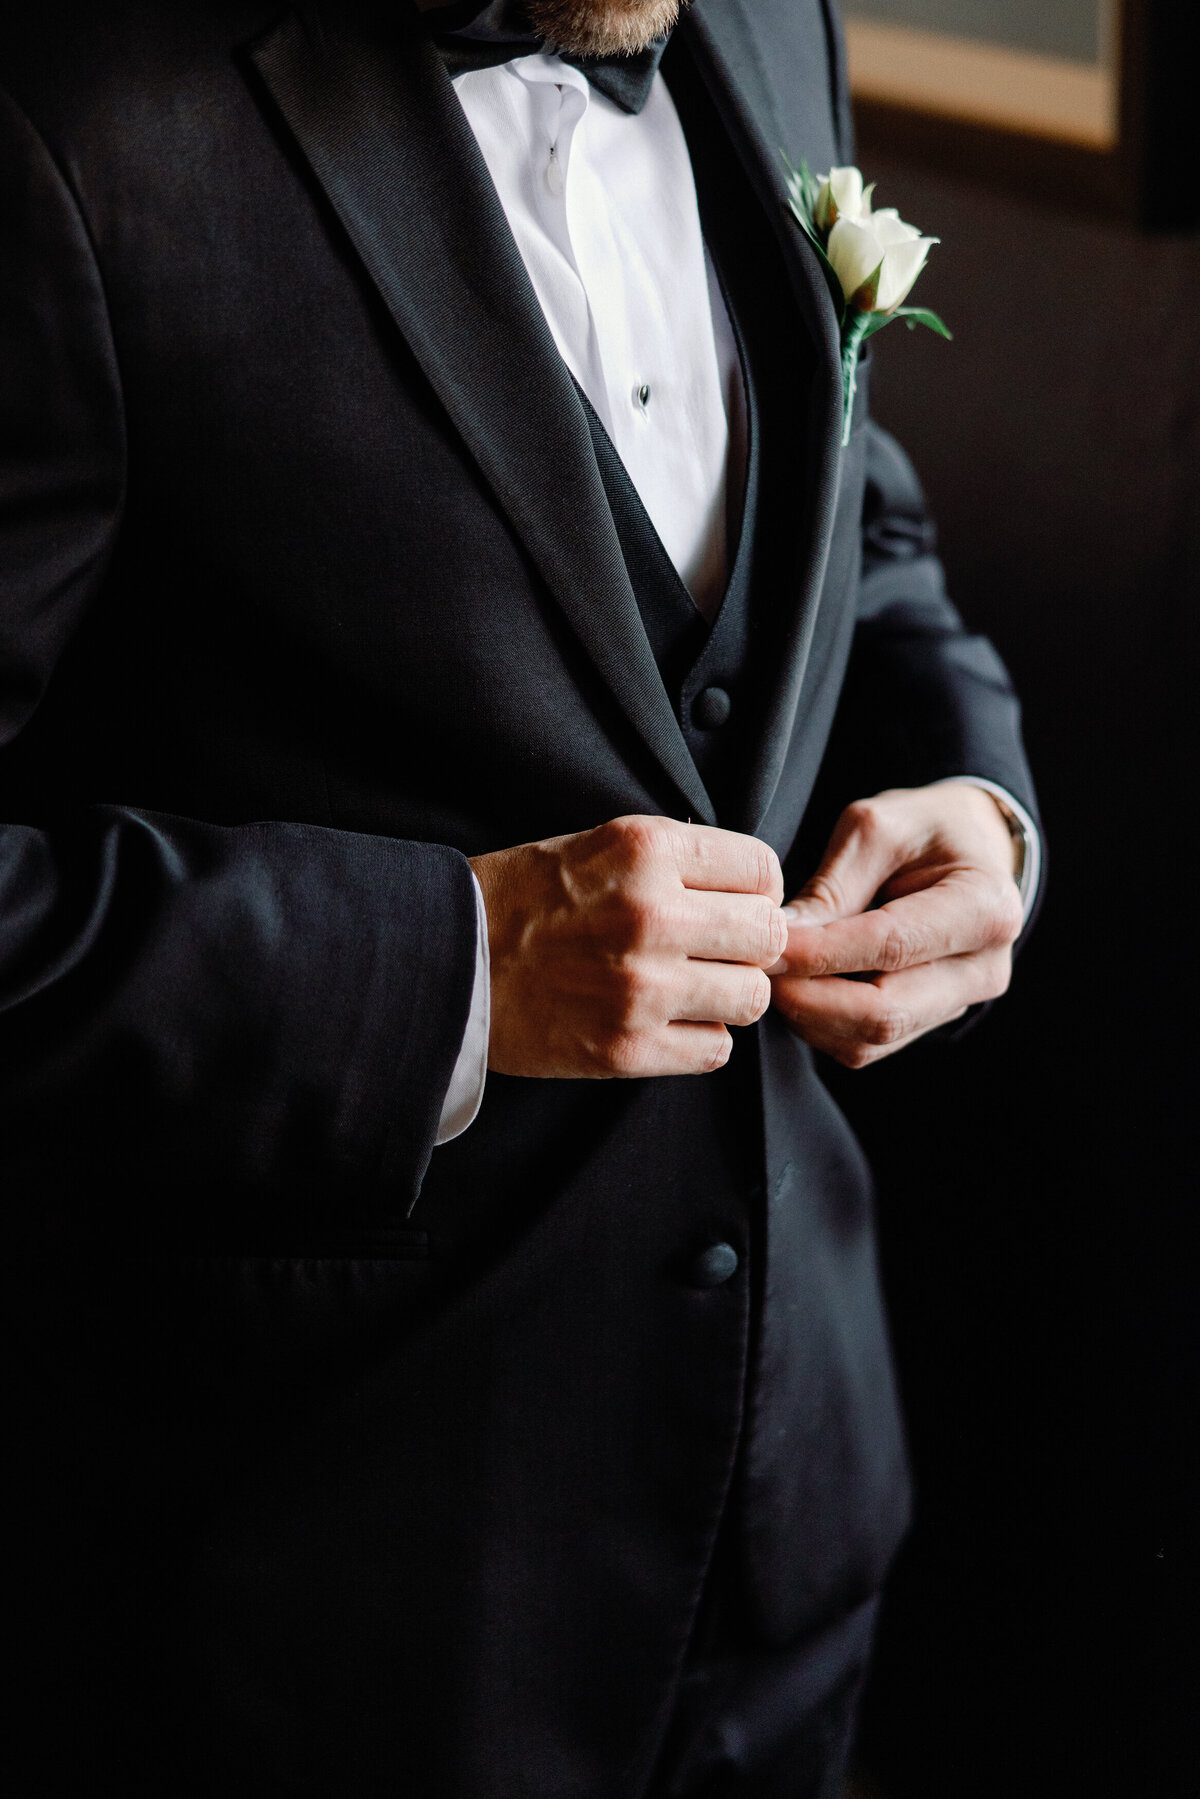 A closeup of a groom's hands as he buttons up his wedding suit jacket